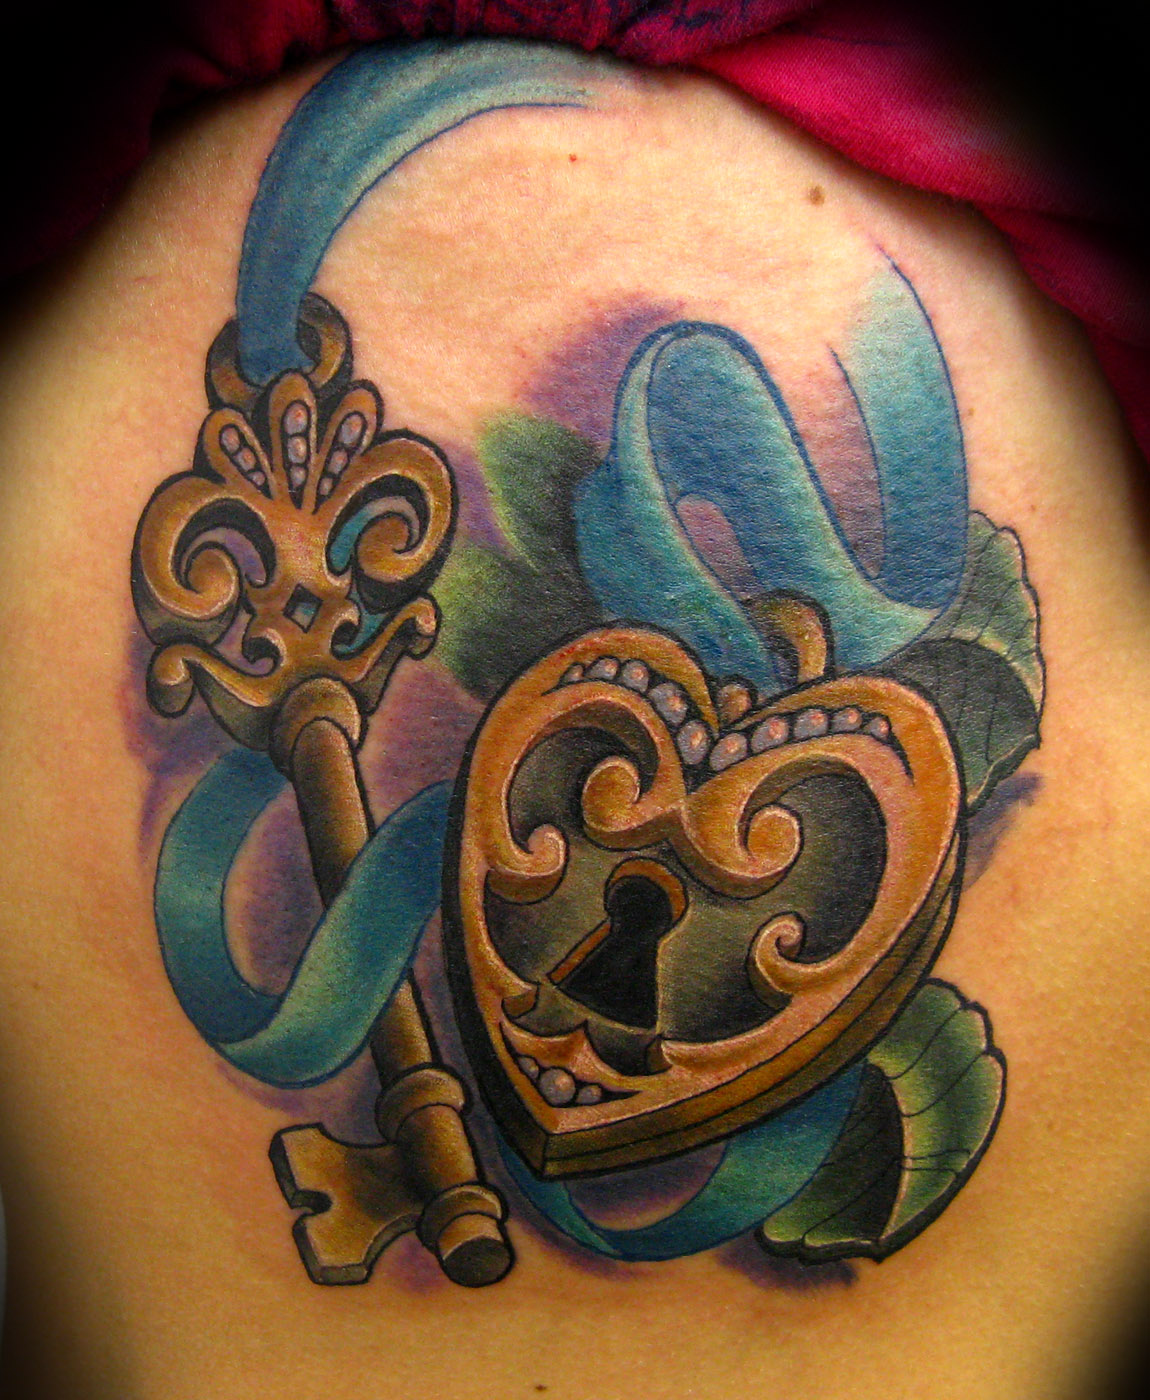 Lock And Key Tattoos Designs, Ideas and Meaning | Tattoos For You